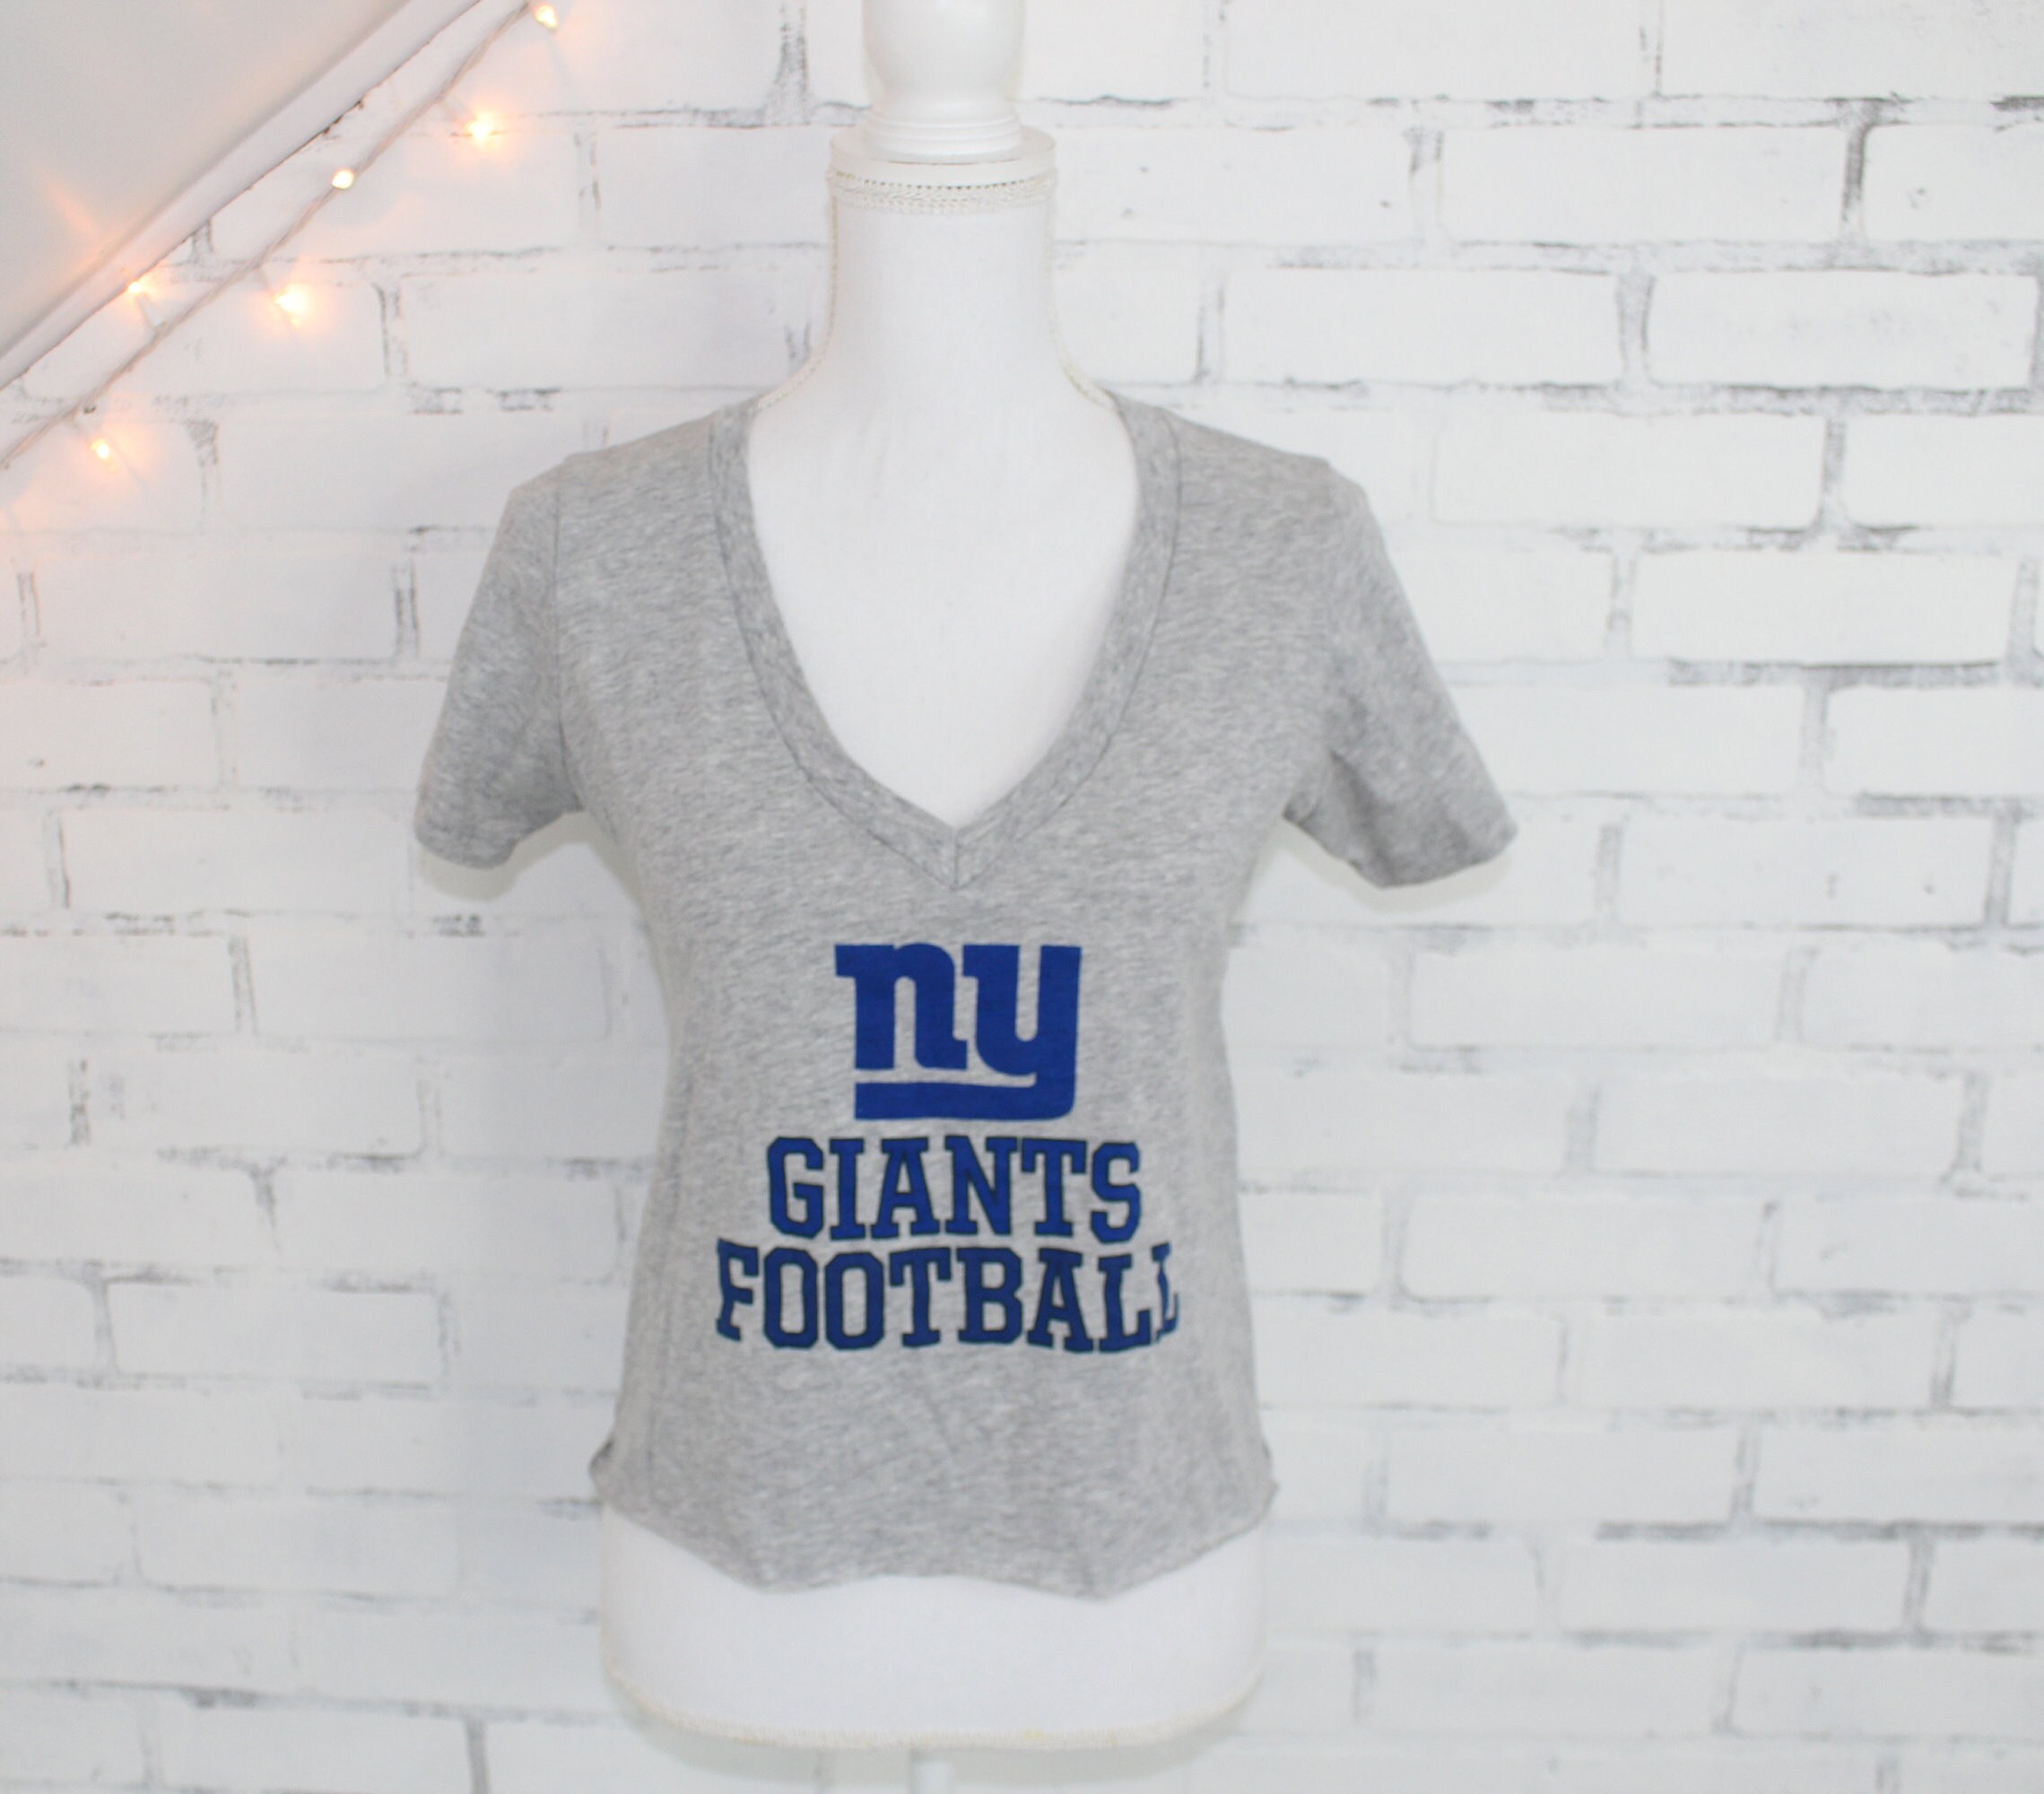 VintageSweetTee New York Giants Football 90 Seasons Vintage Graphic T-Shirt (Rare One of A Kind)